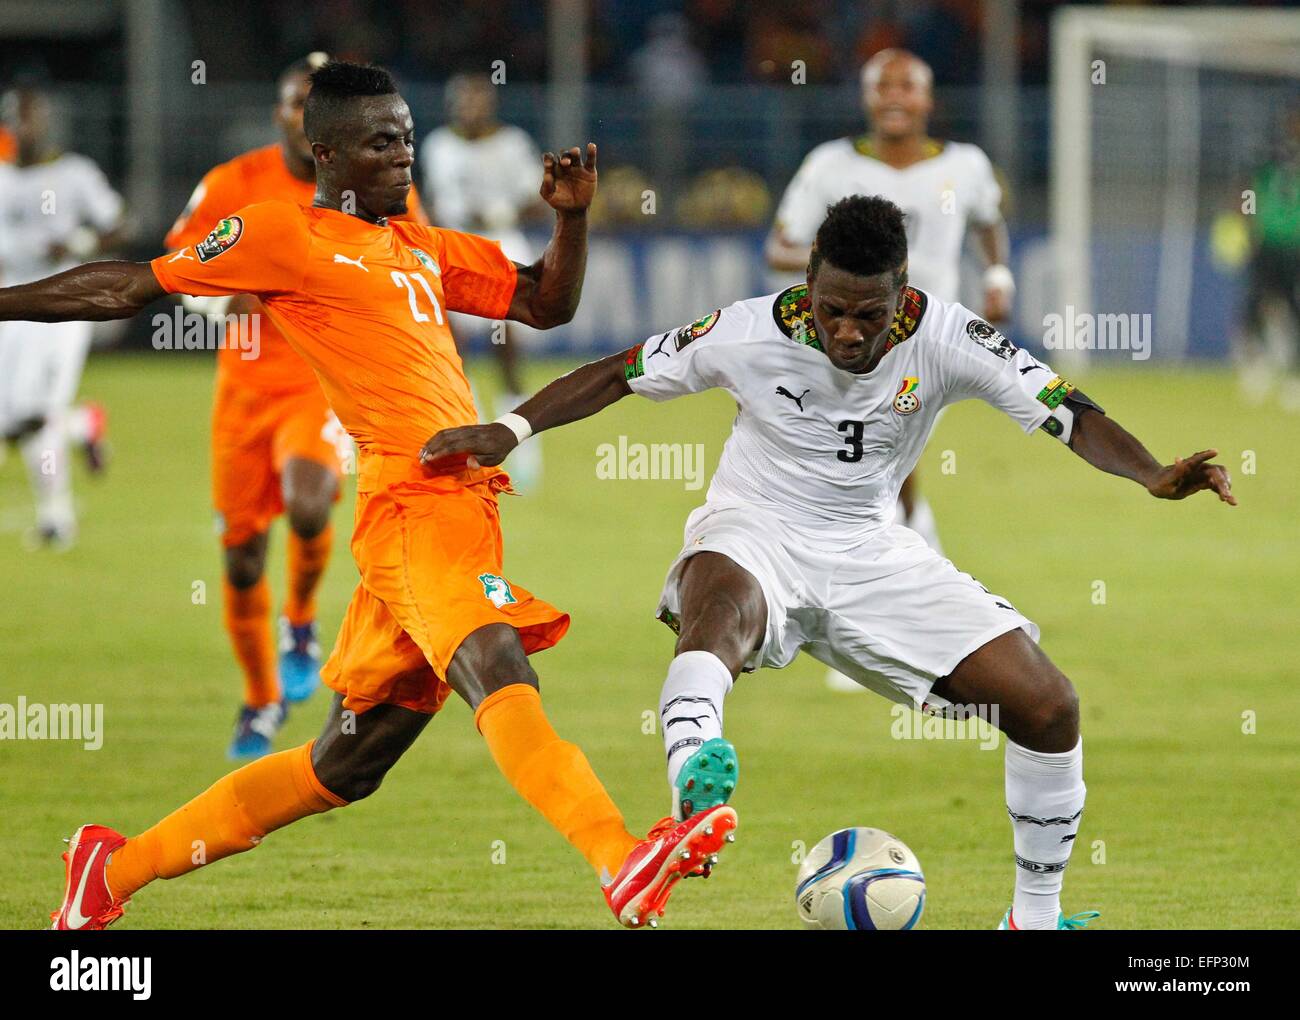 Bata, Equatorial Guinea. 8th Feb, 2015. Asamoah Gyan (R) of Ghana vies with  Eric Bertrand Bailly of Cote d'Ivoire during the final match of Africa Cup  of Nations in Bata, Equatorial Guinea,